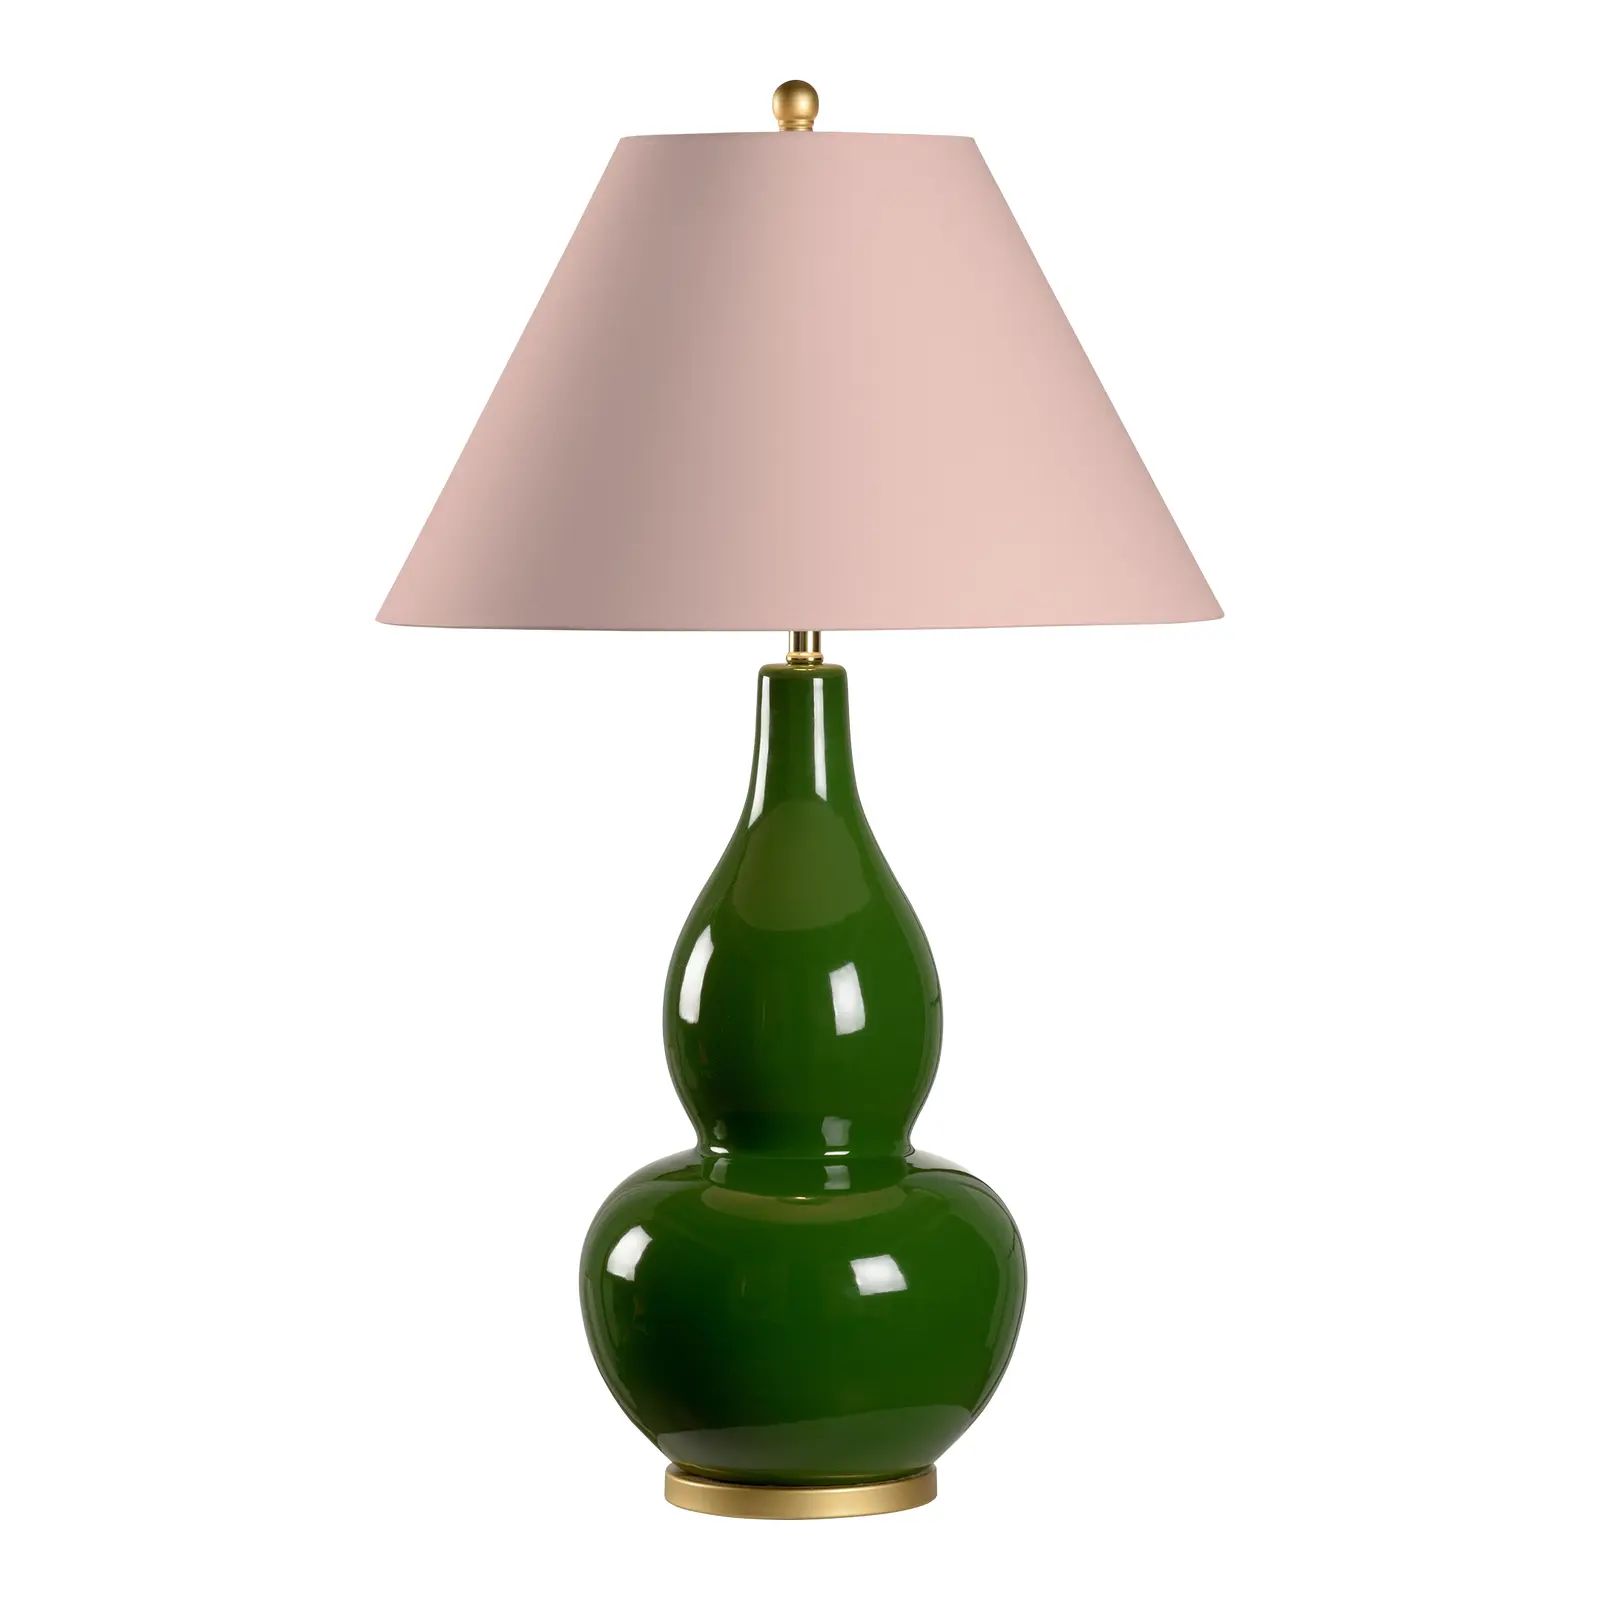 Casa Cosima Large Double Gourd Table Lamp, Dark Green Base with East Lake Rose Lampshade | Chairish